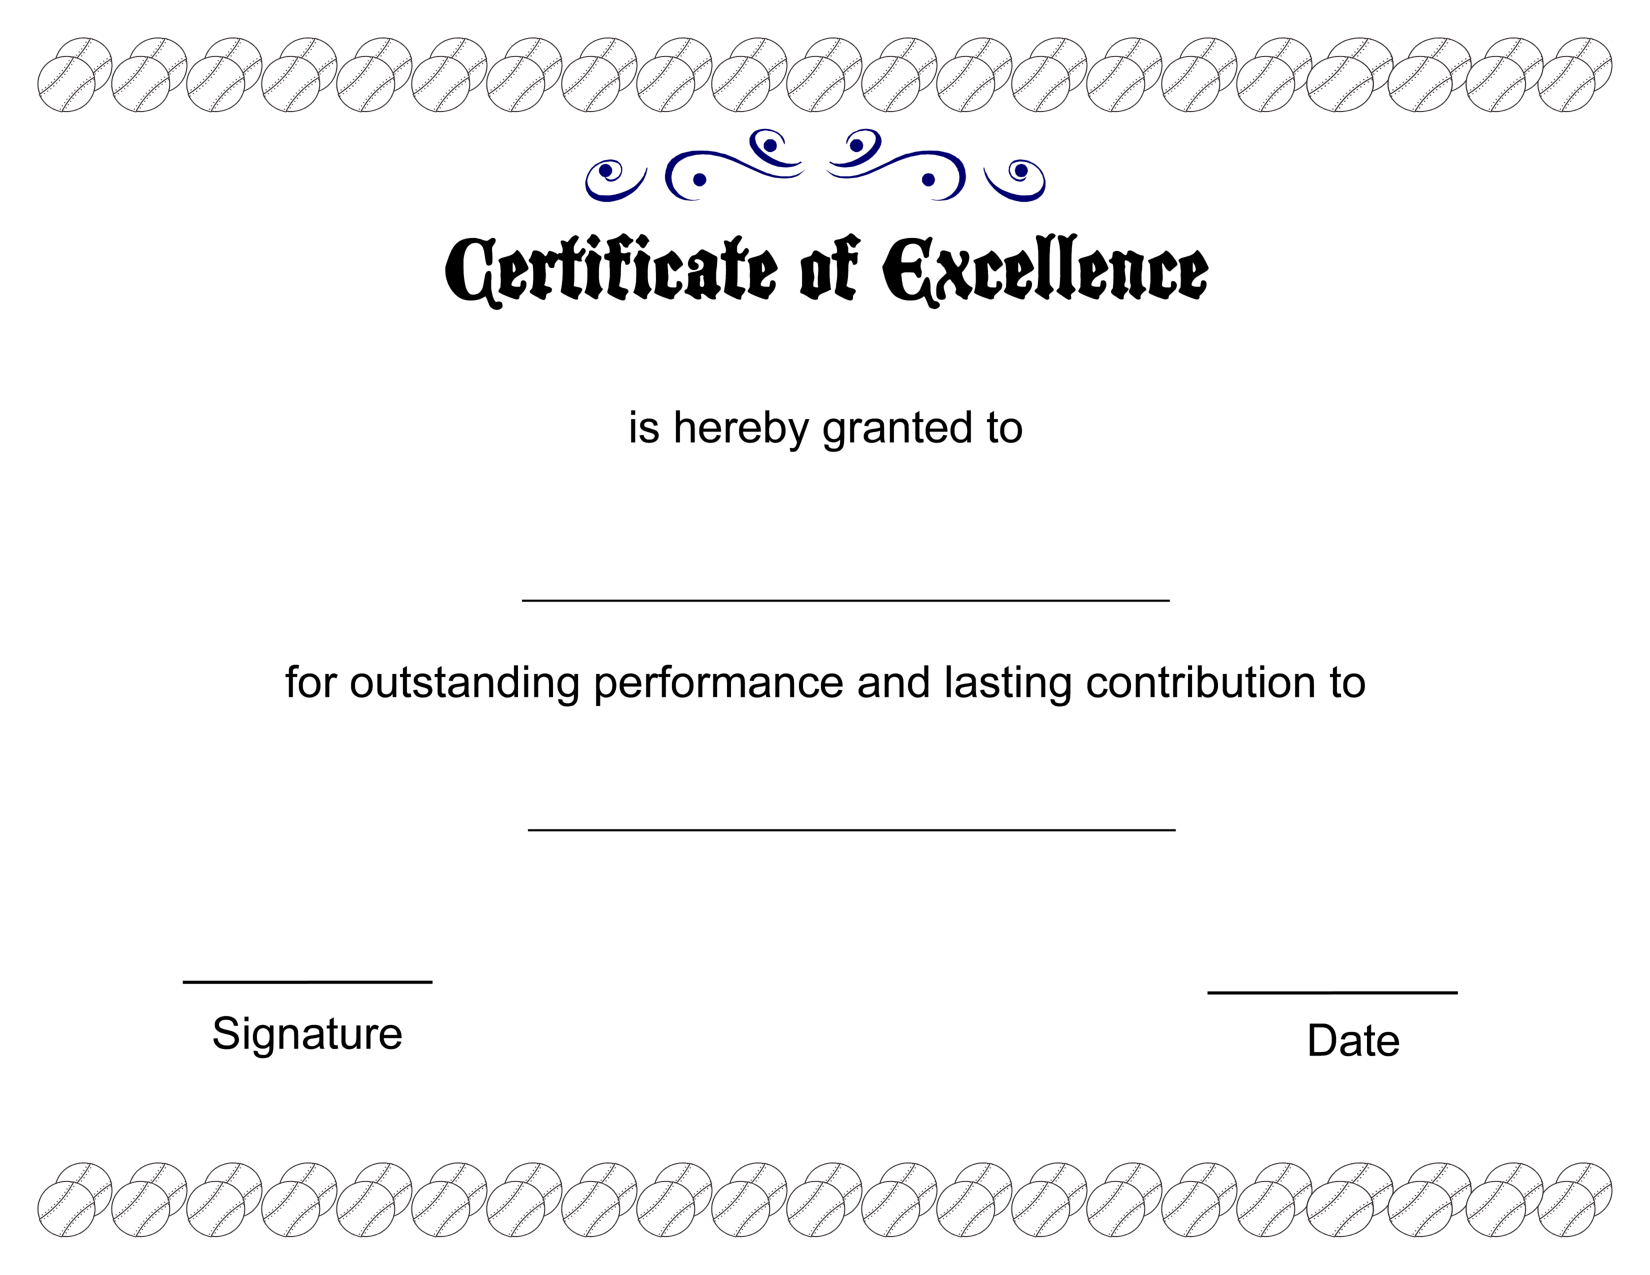 Excellent Certificate Of Excellence Template Designed With Regard To Award Of Excellence Certificate Template